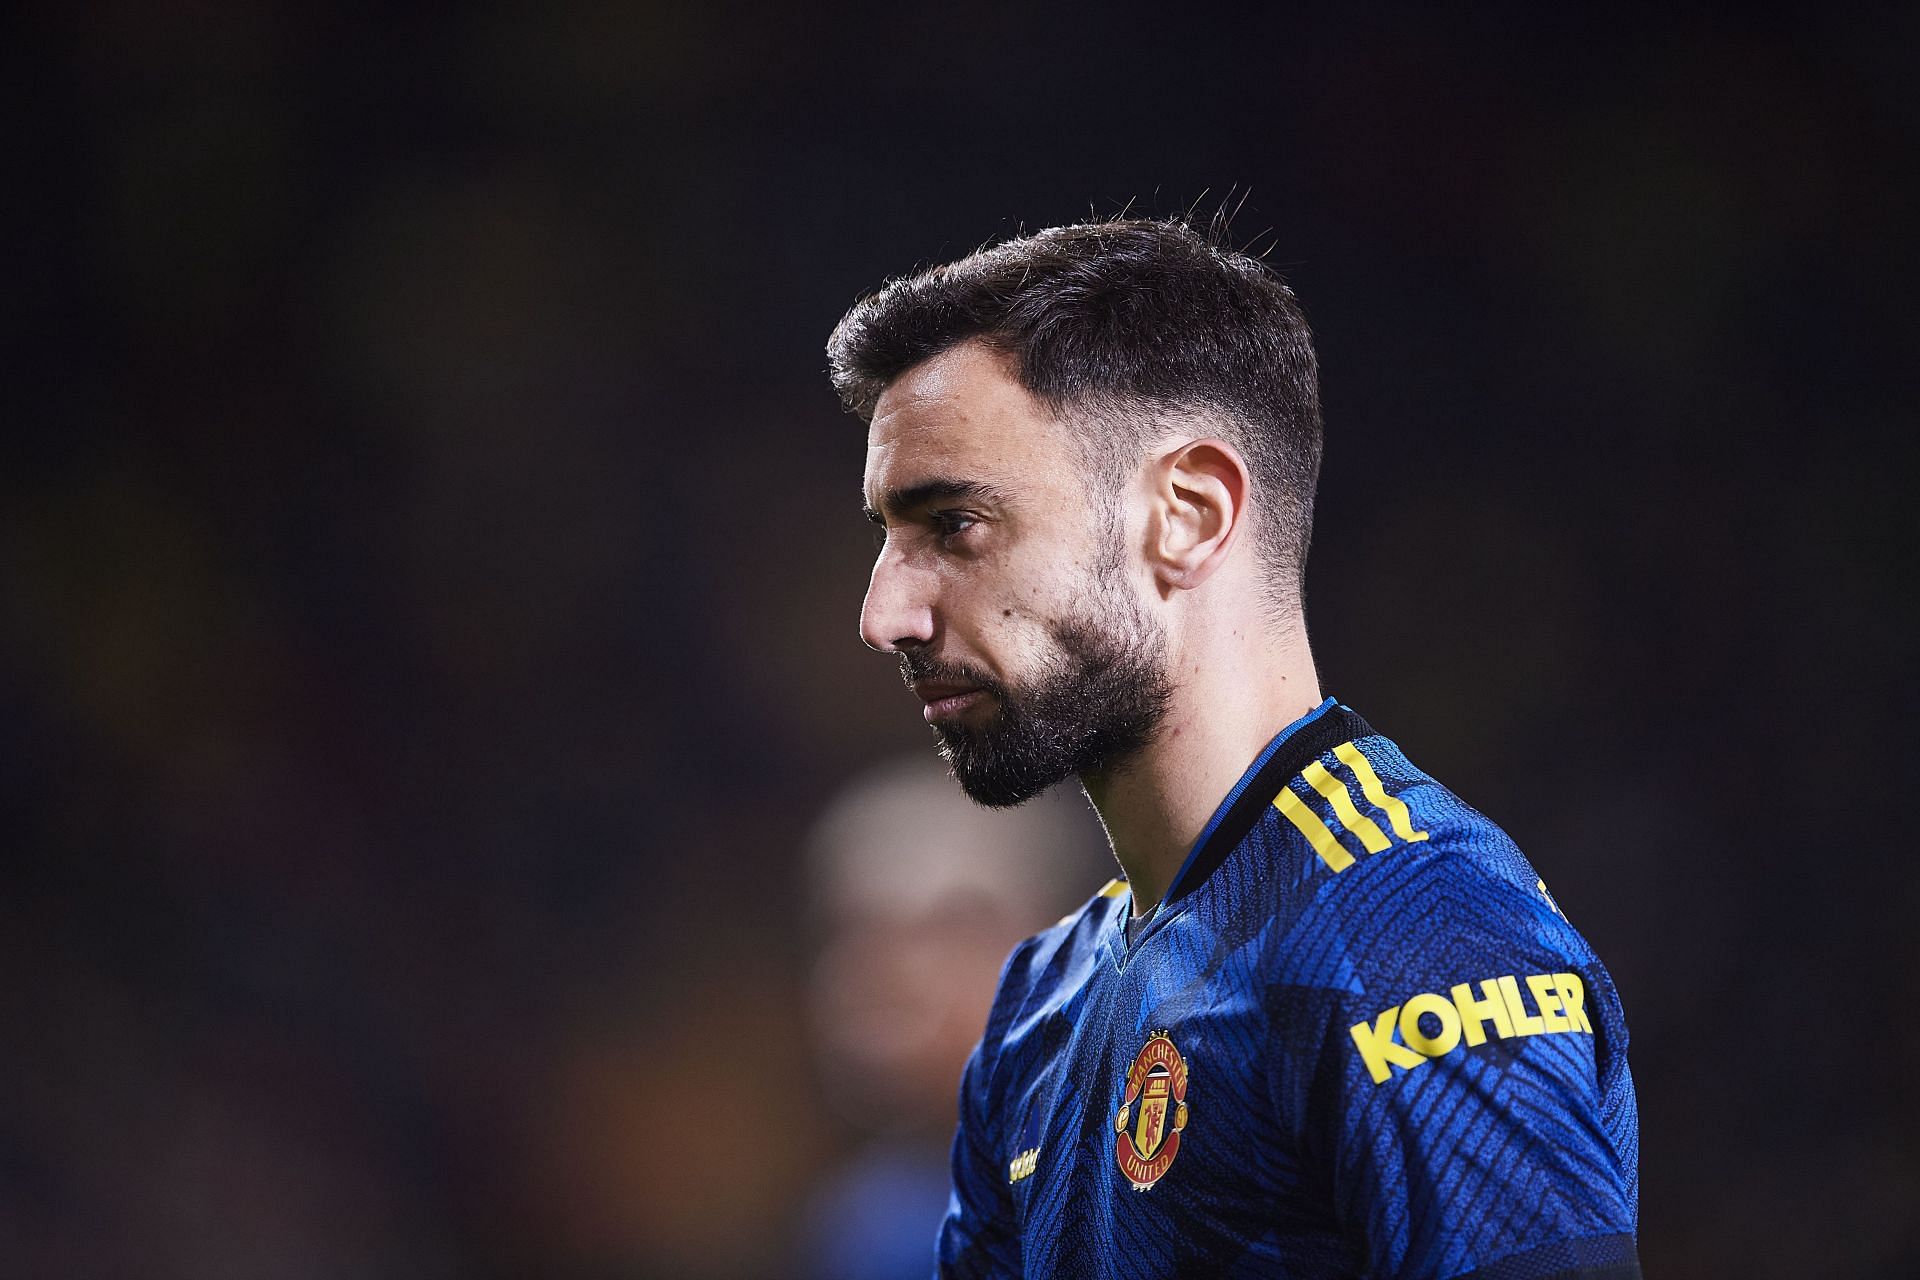 Bruno Fernandes has been an inspired signing by Manchester United.